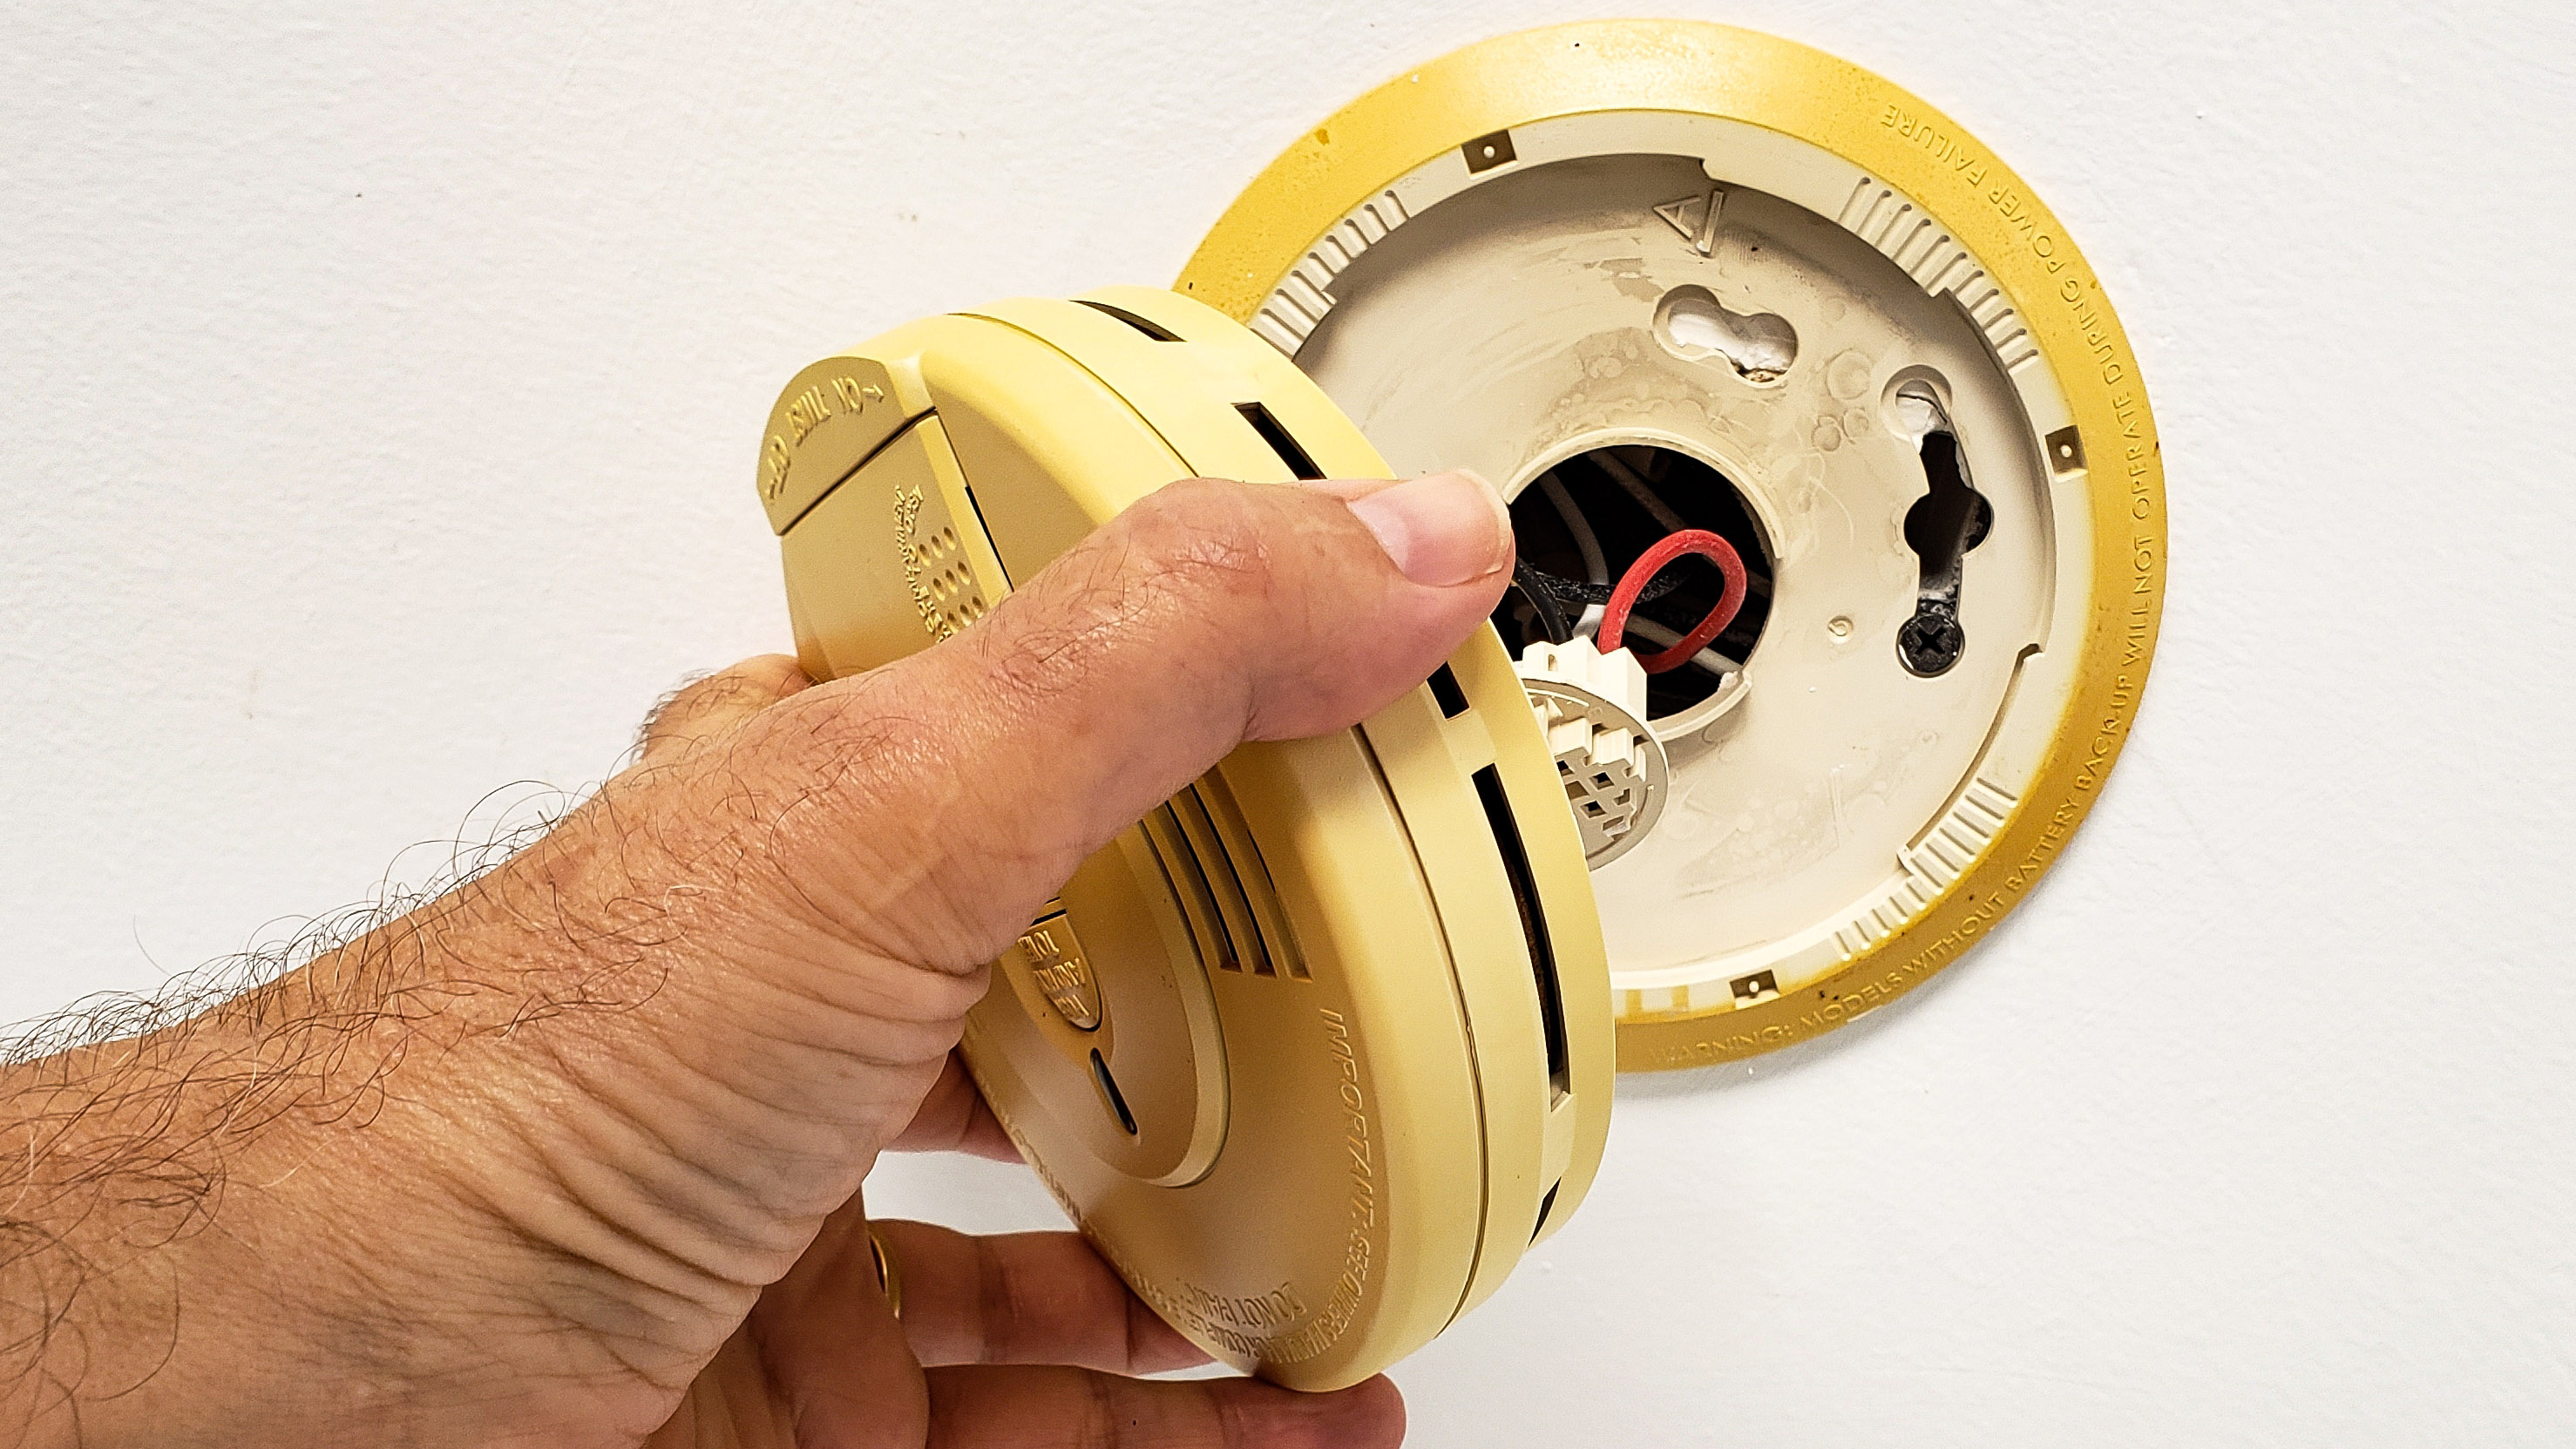 Image of a mans hand opening up builtin smoke alarm to change